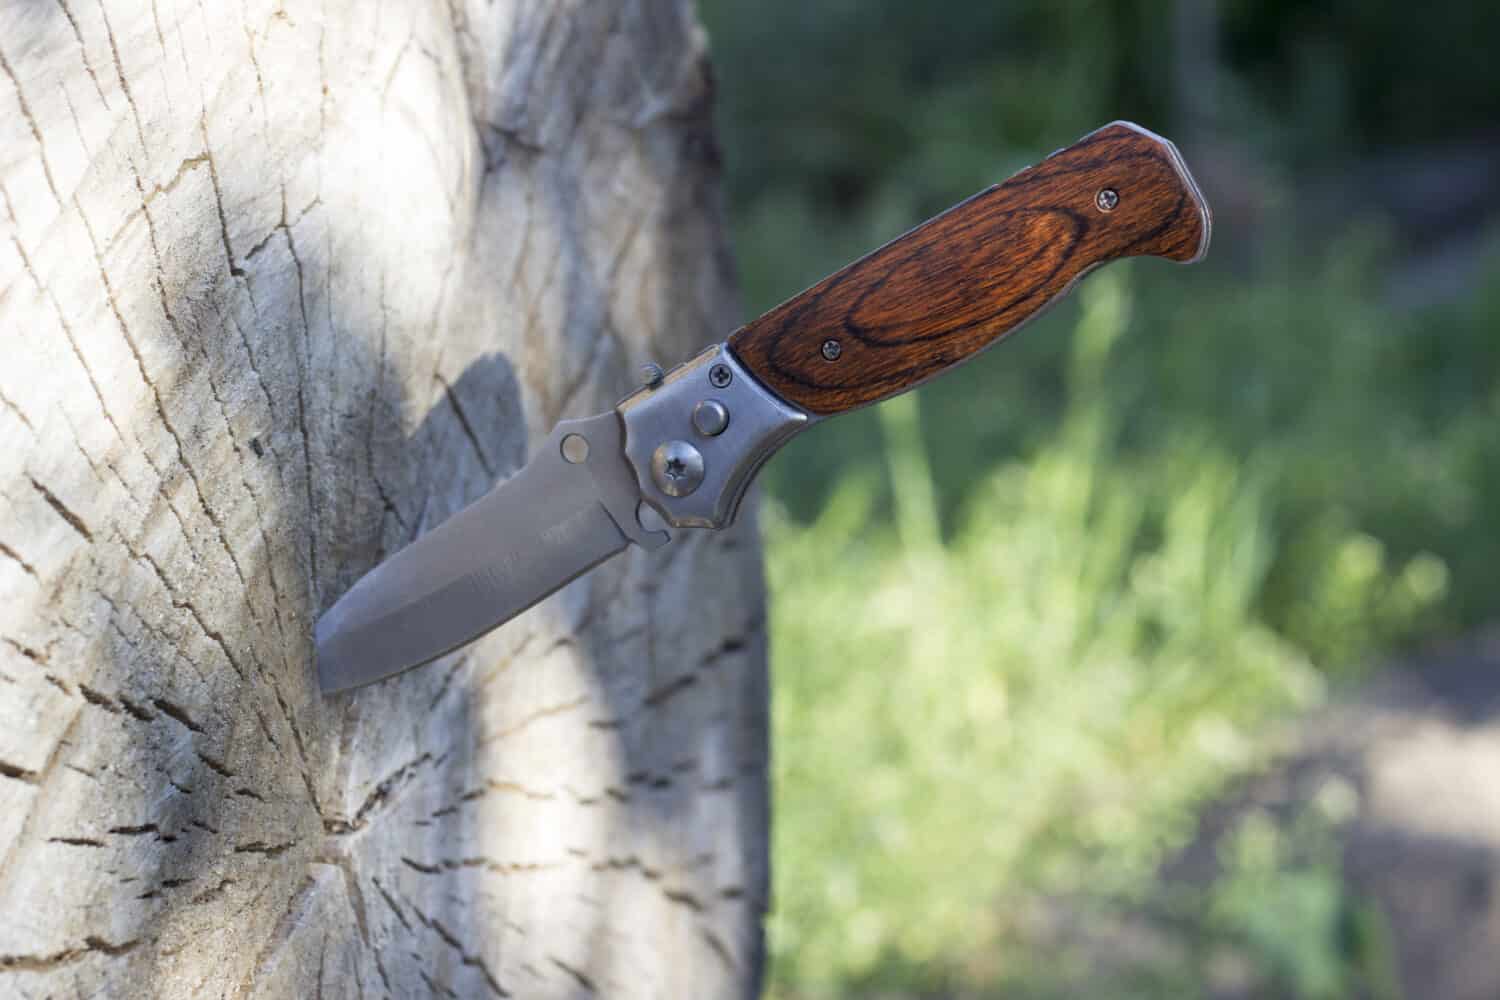 Folding knife stuck in a wooden log, close-up